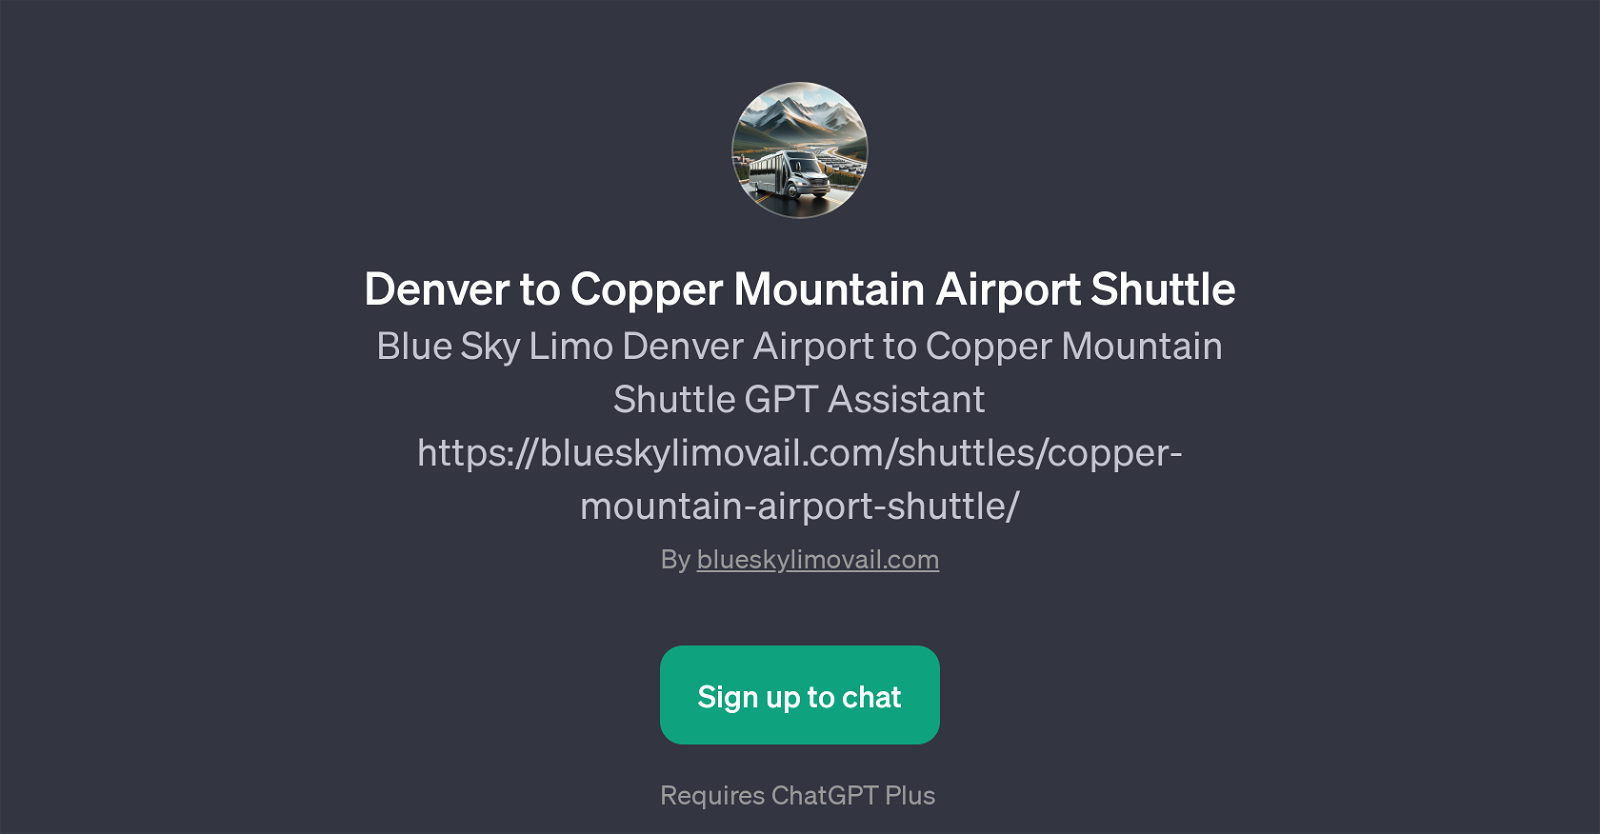 Denver to Copper Mountain Airport Shuttle GPT Assistant website